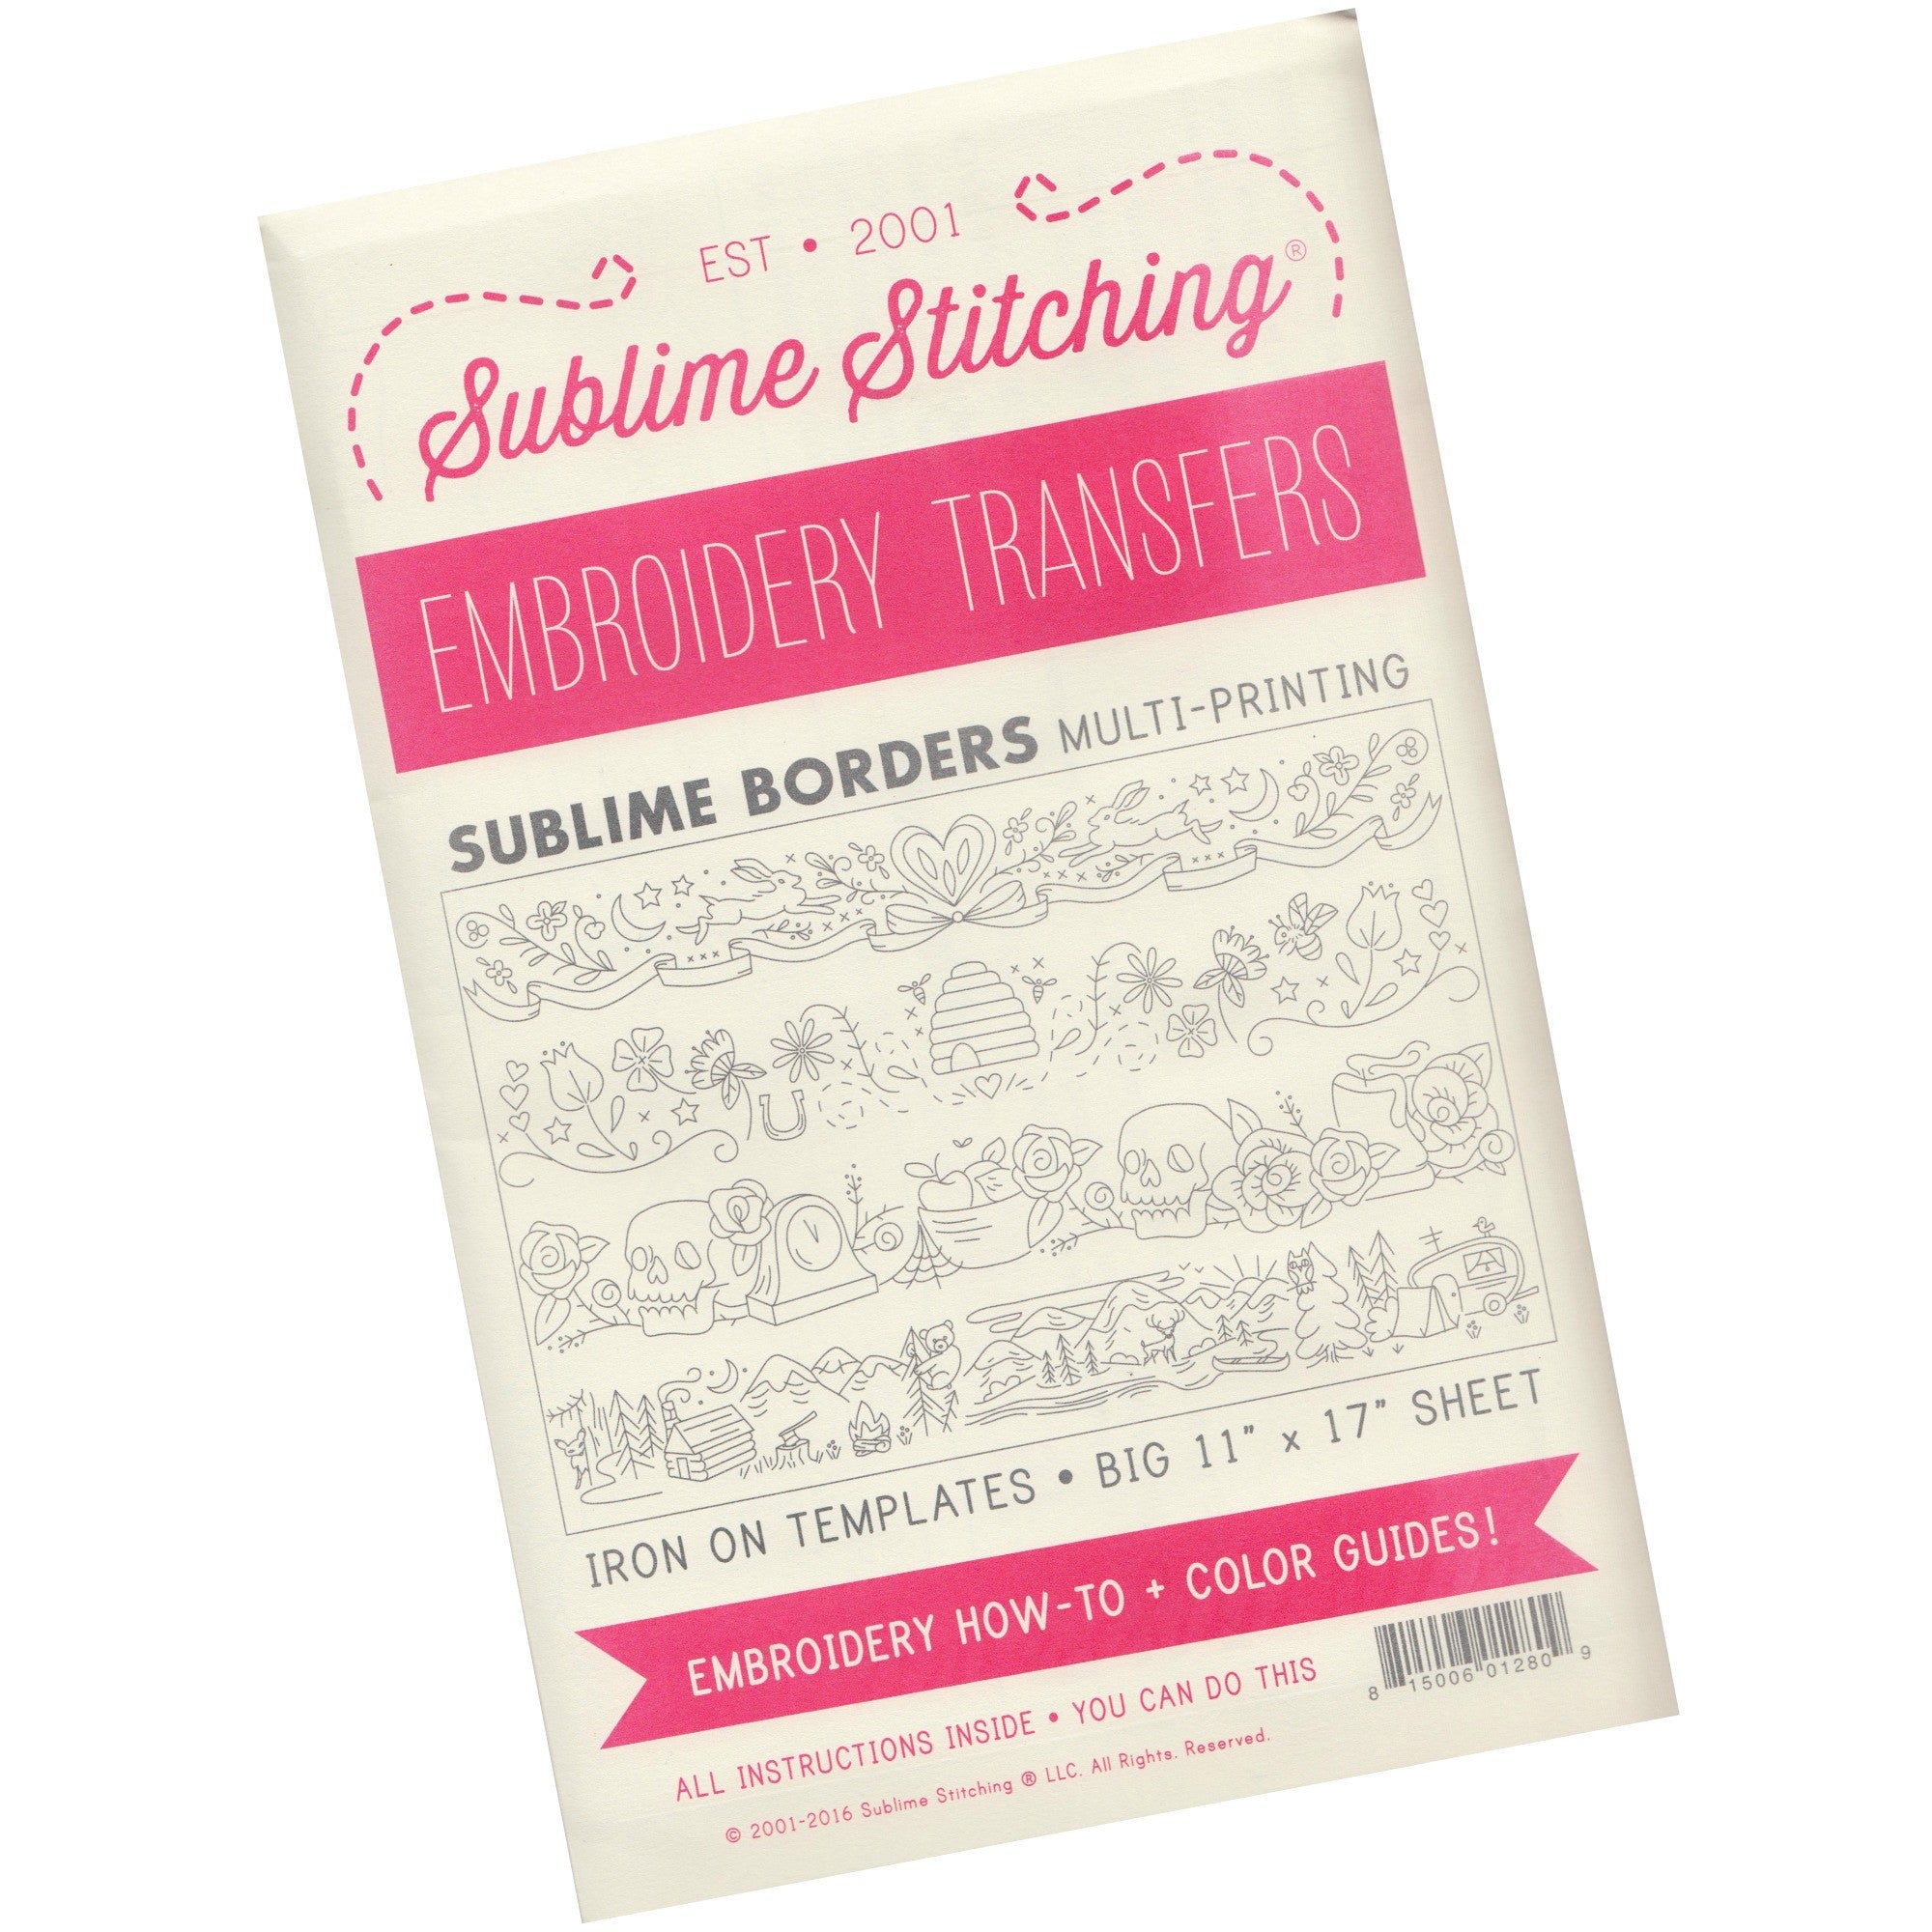 Carbon Transfer Paper for Hand Embroidery Patterns – Sublime Stitching